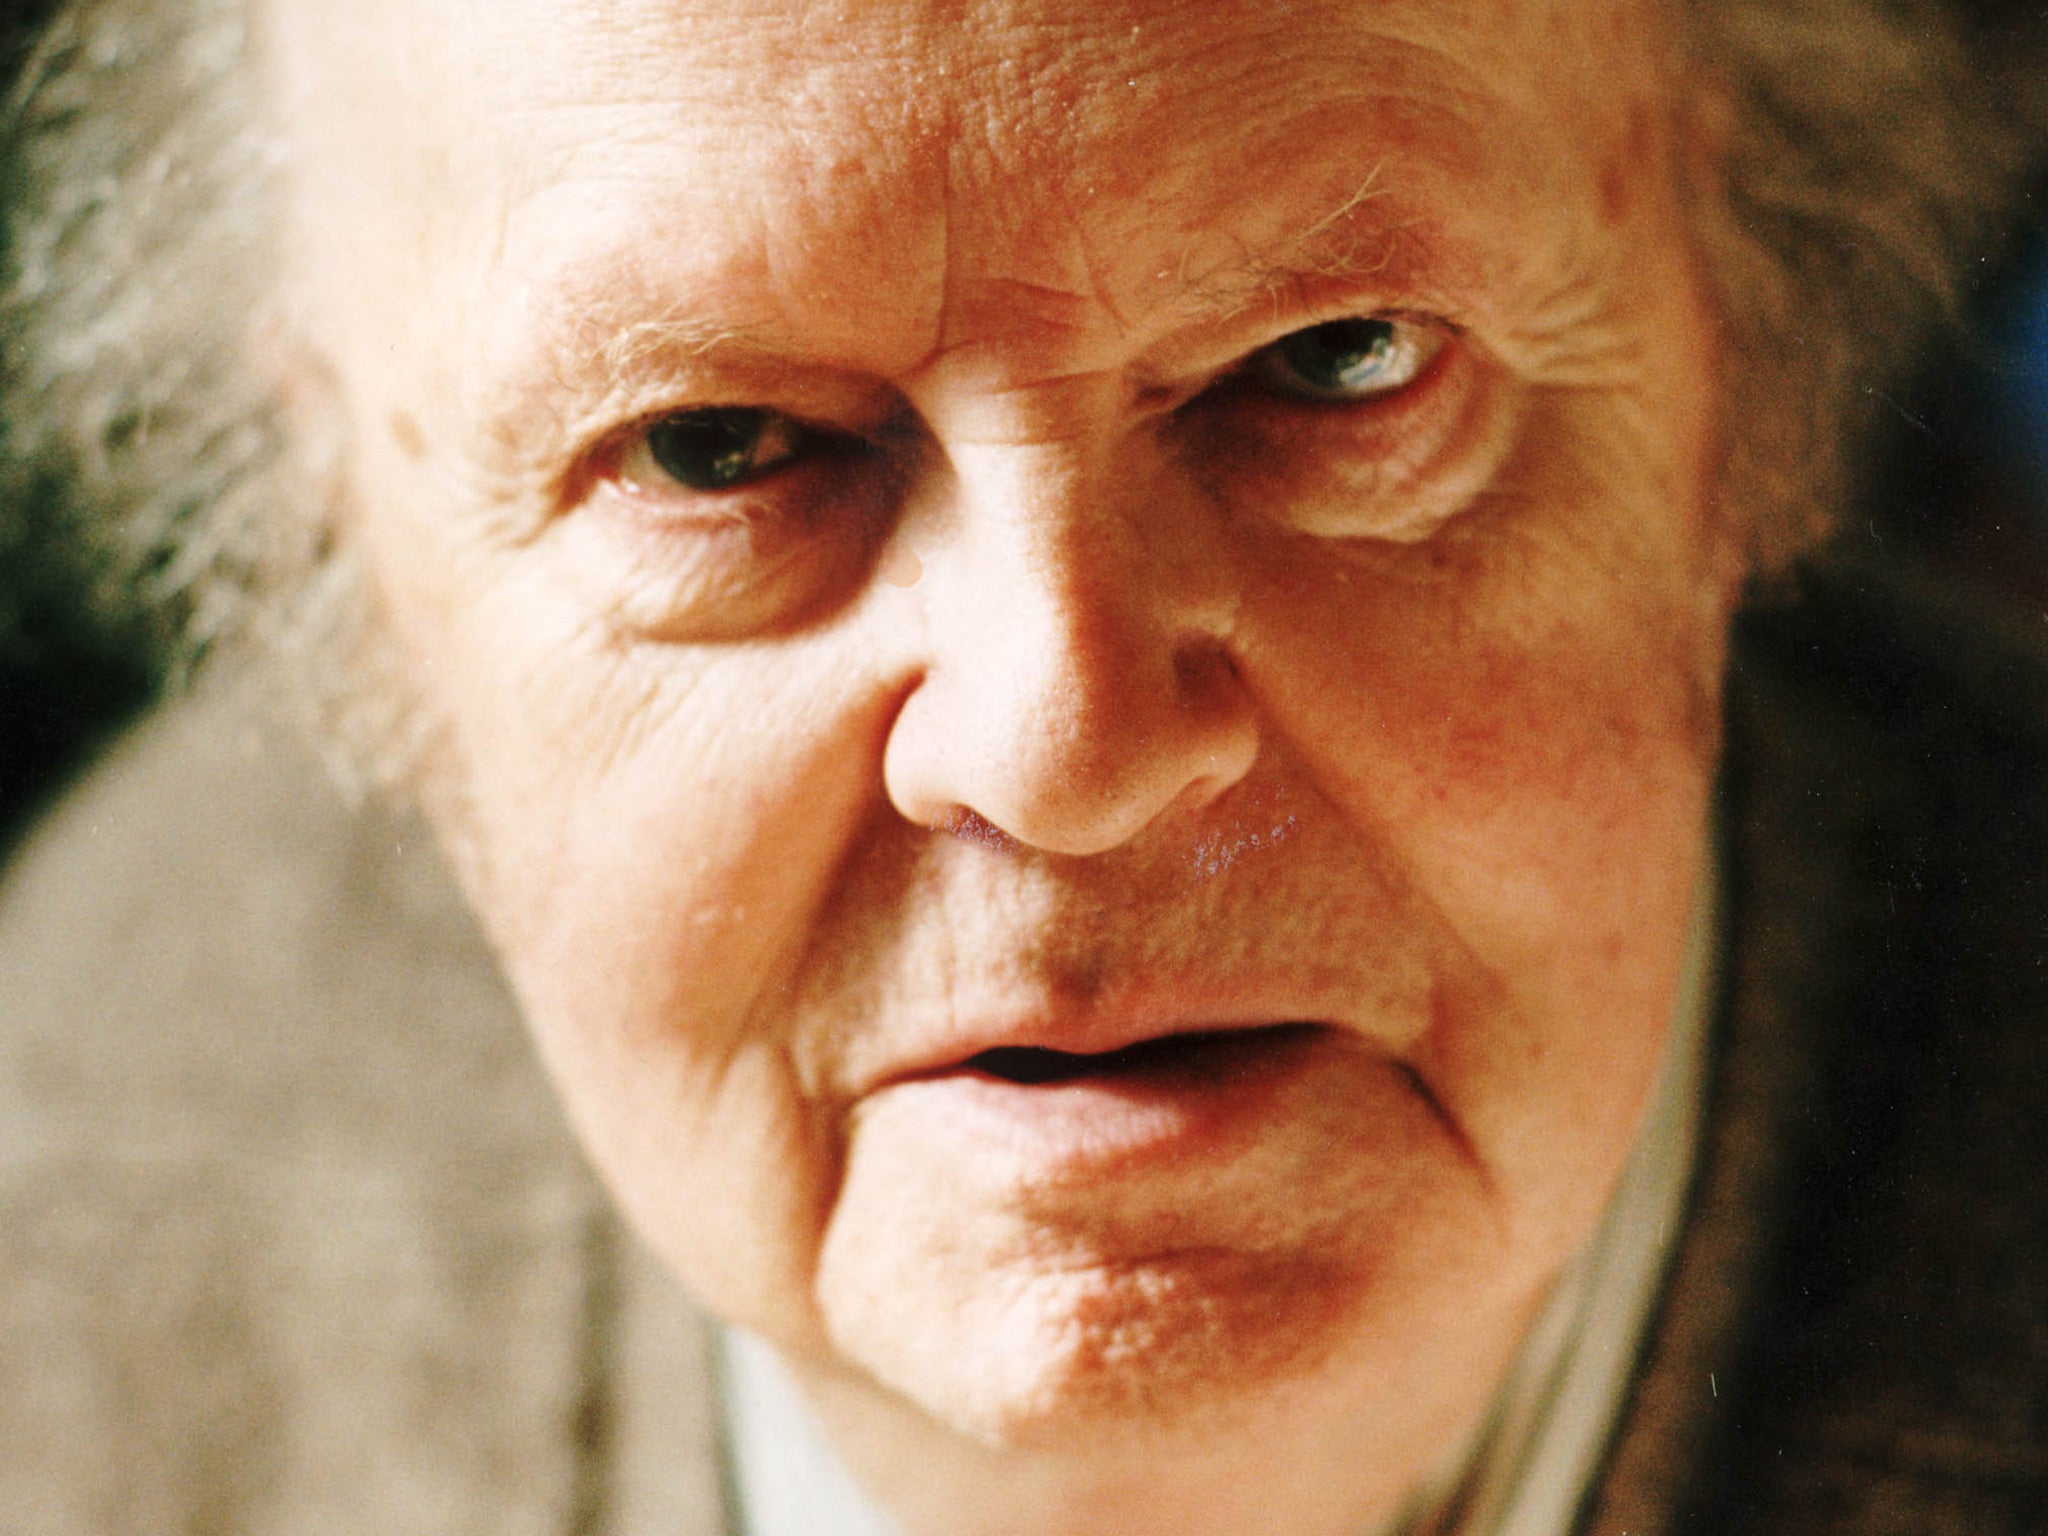 John Bayley, author and literary critic, died aged 89